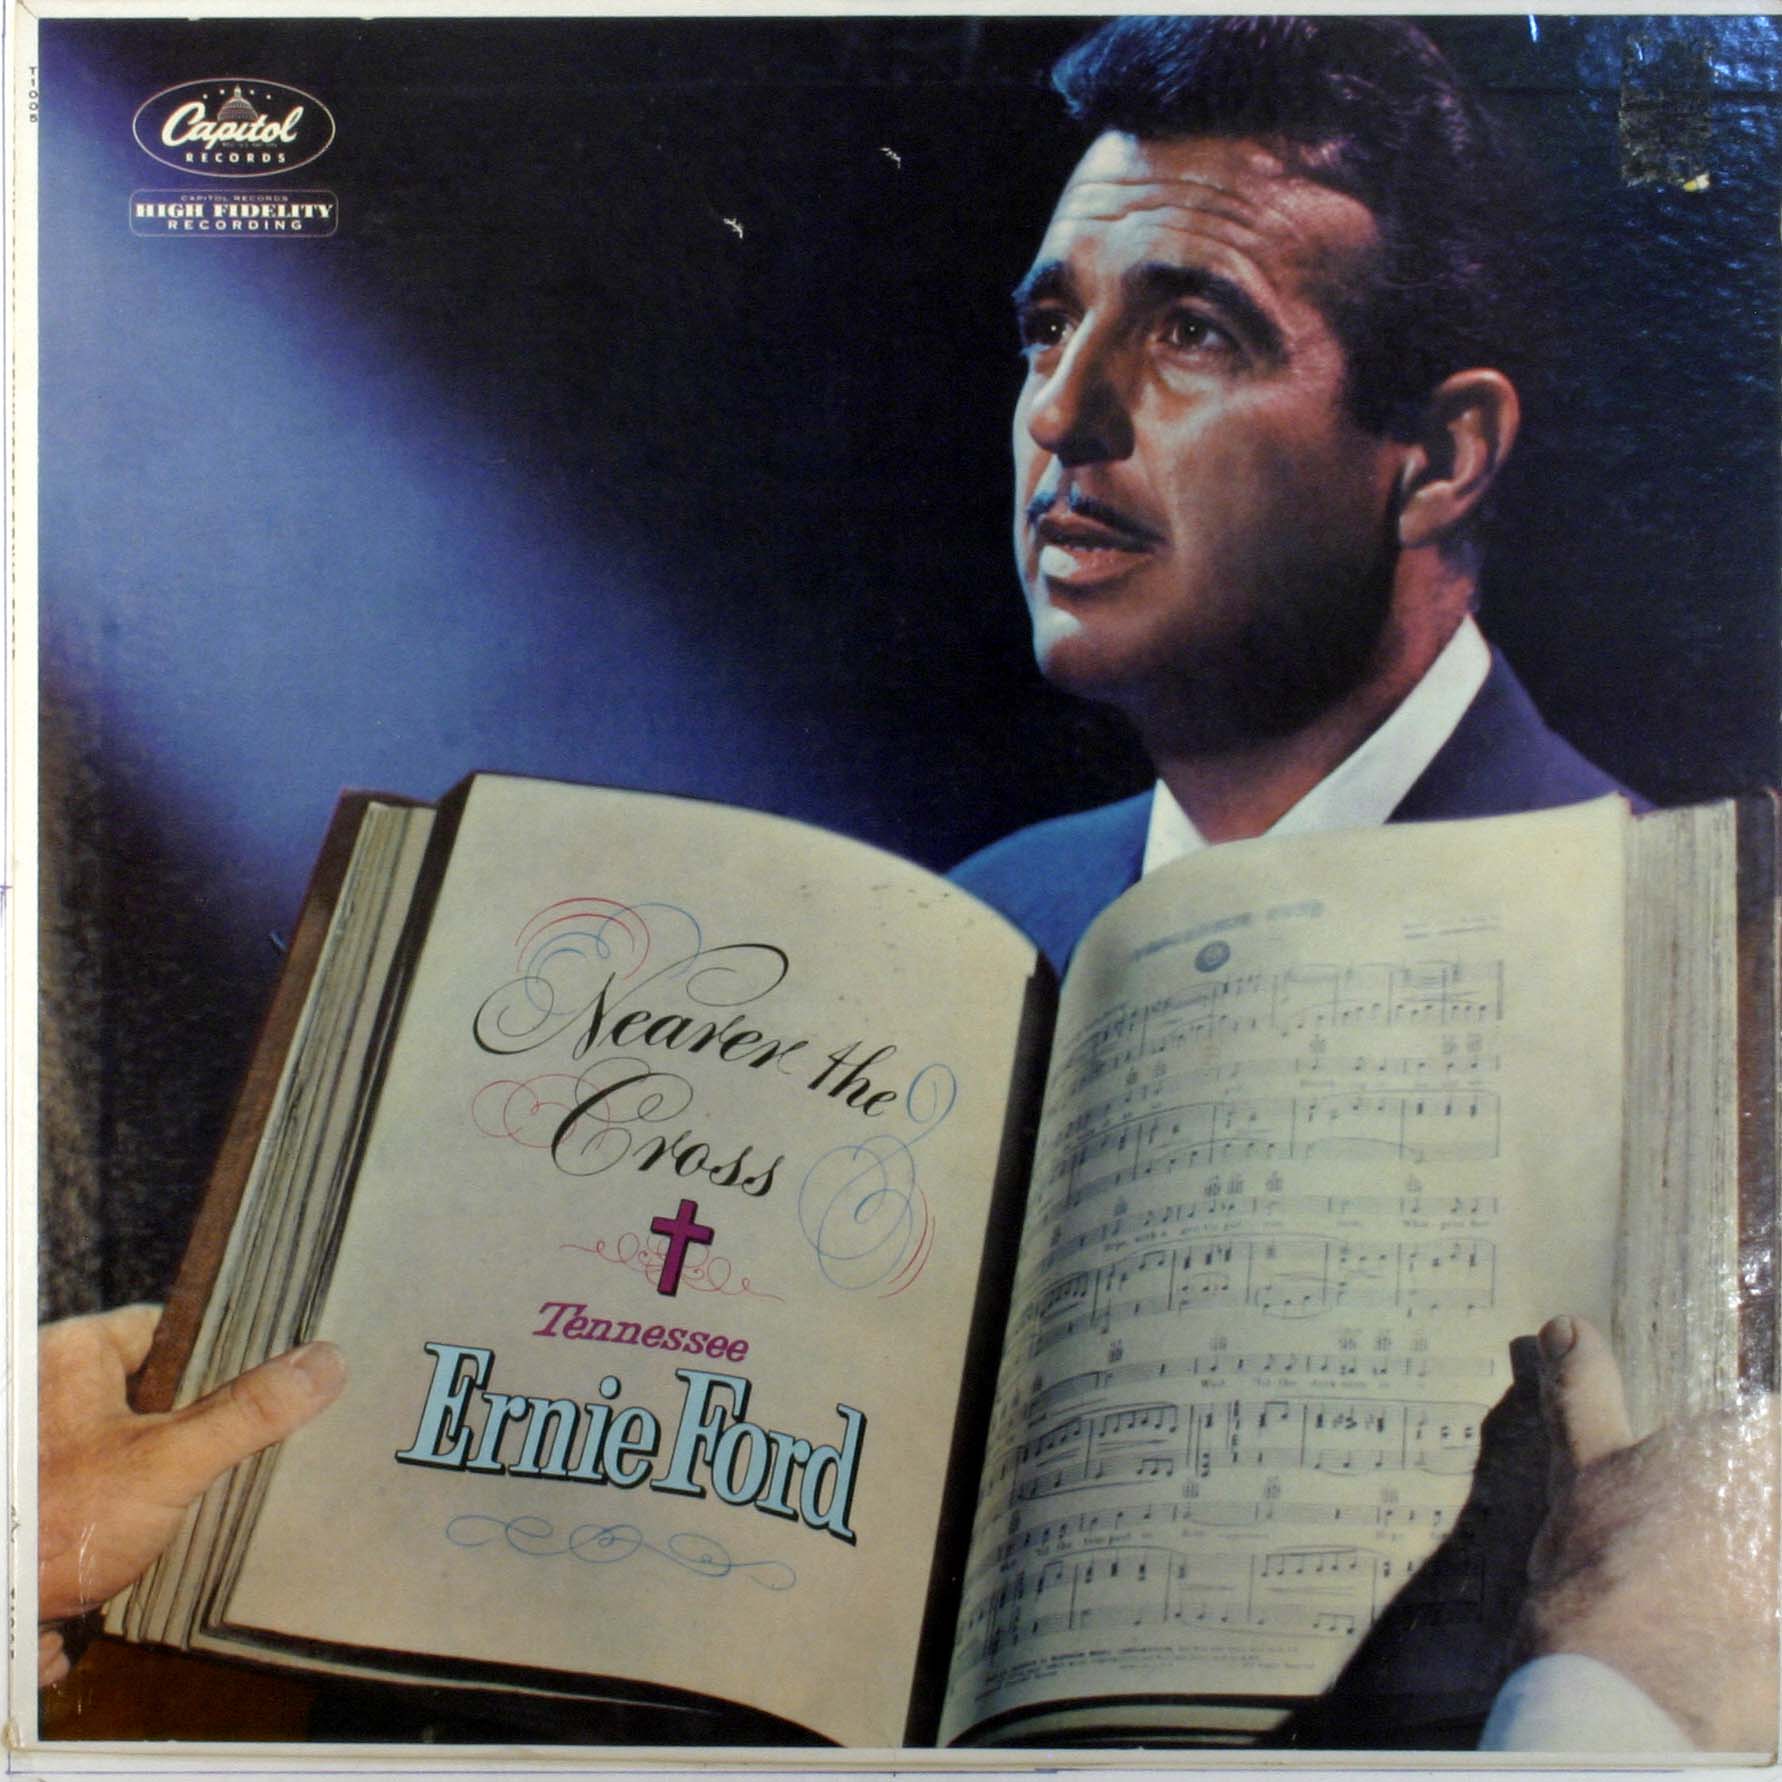 Tennessee ernie ford mule train song #9